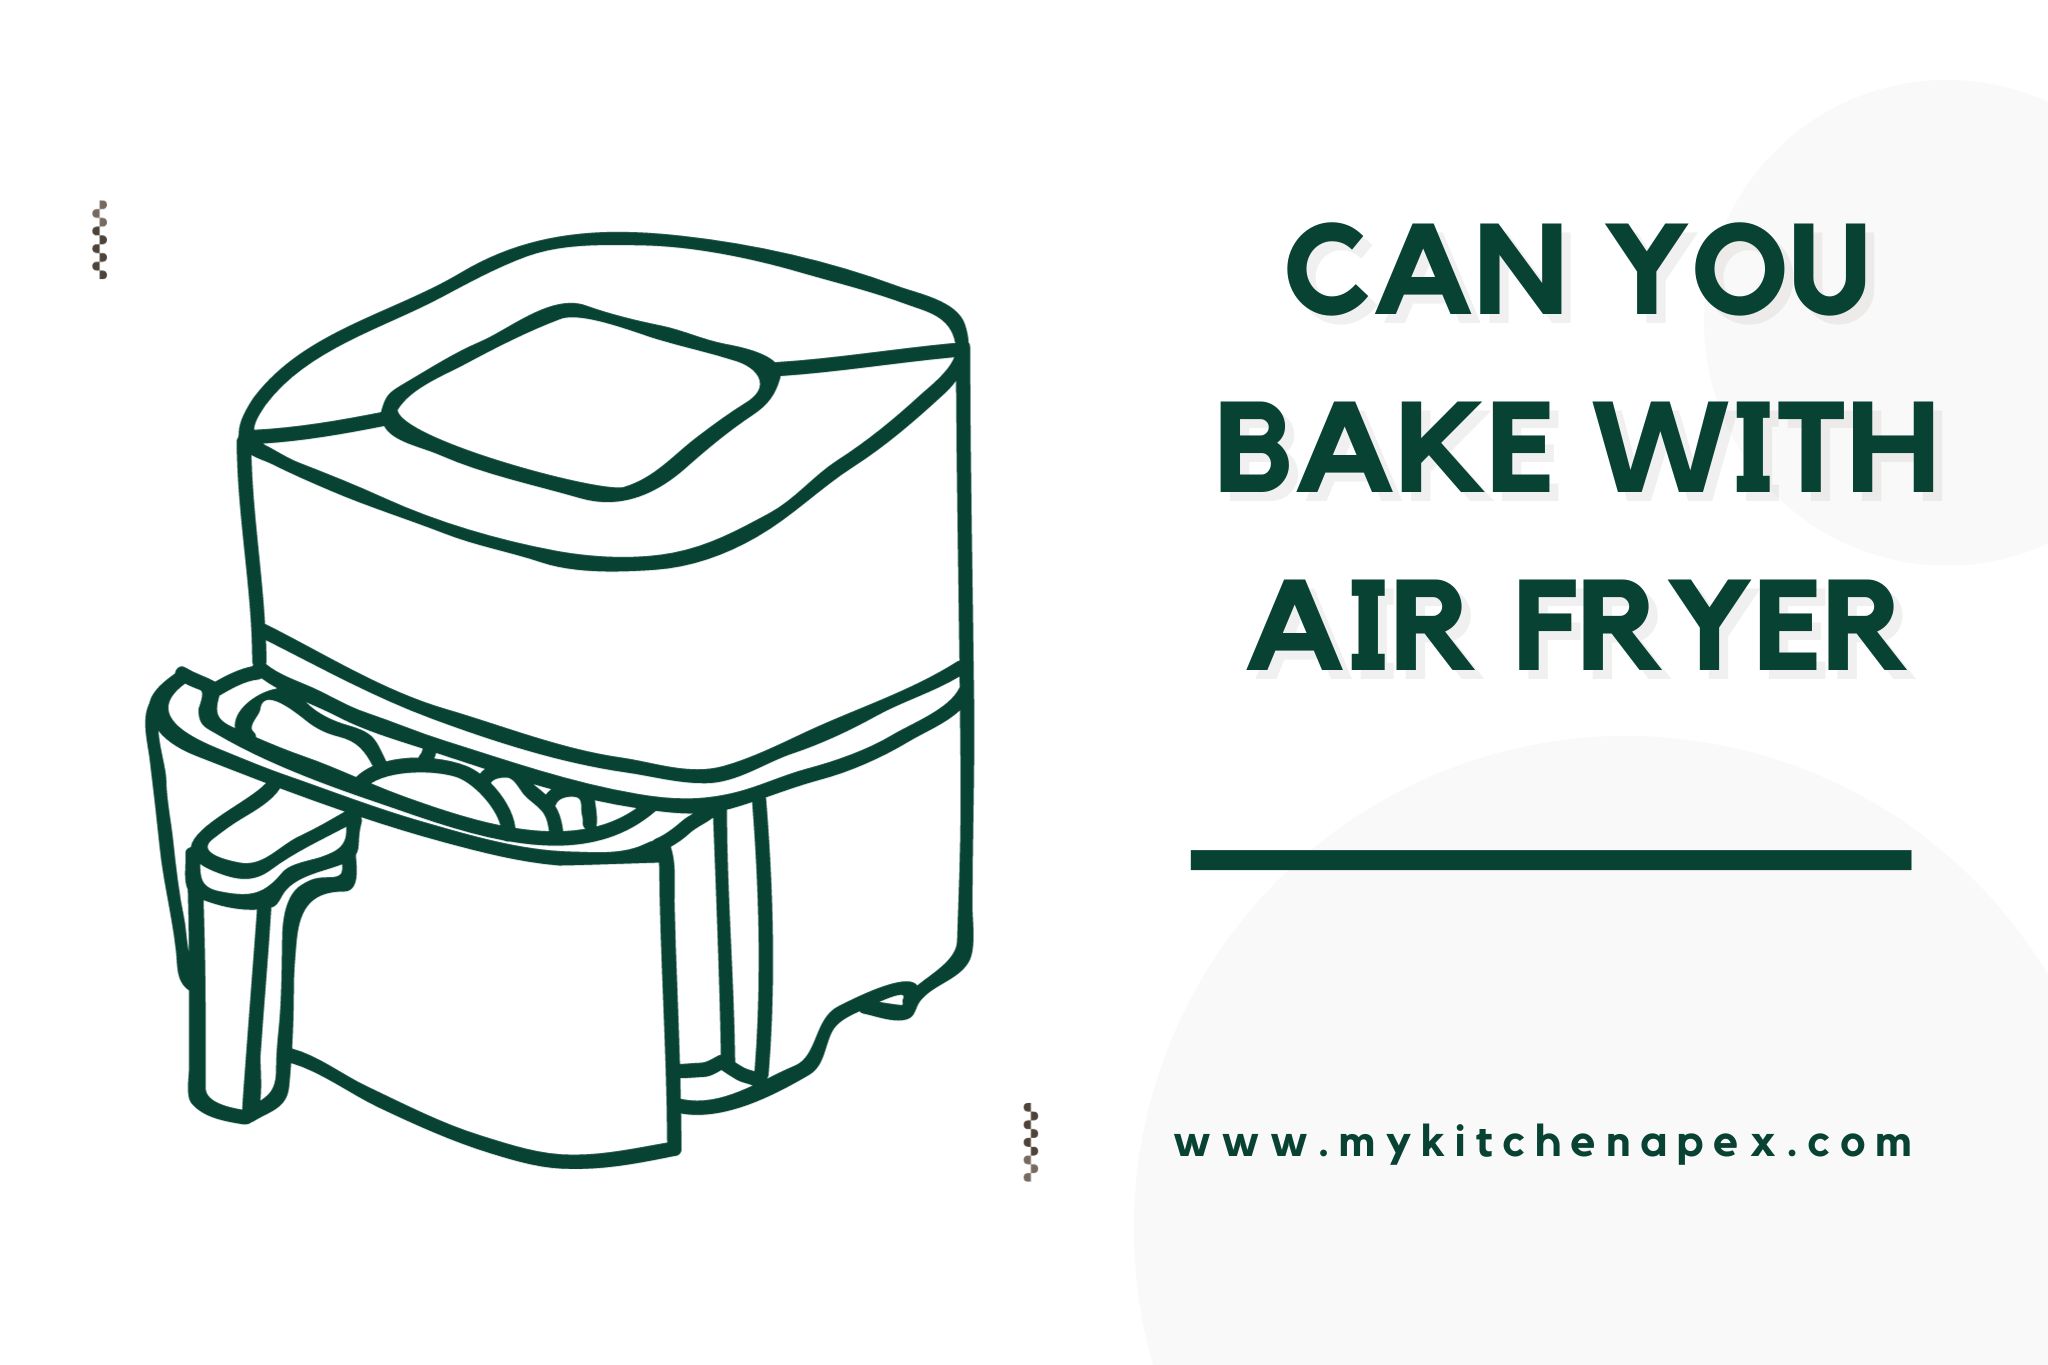 can you bake with air fryer